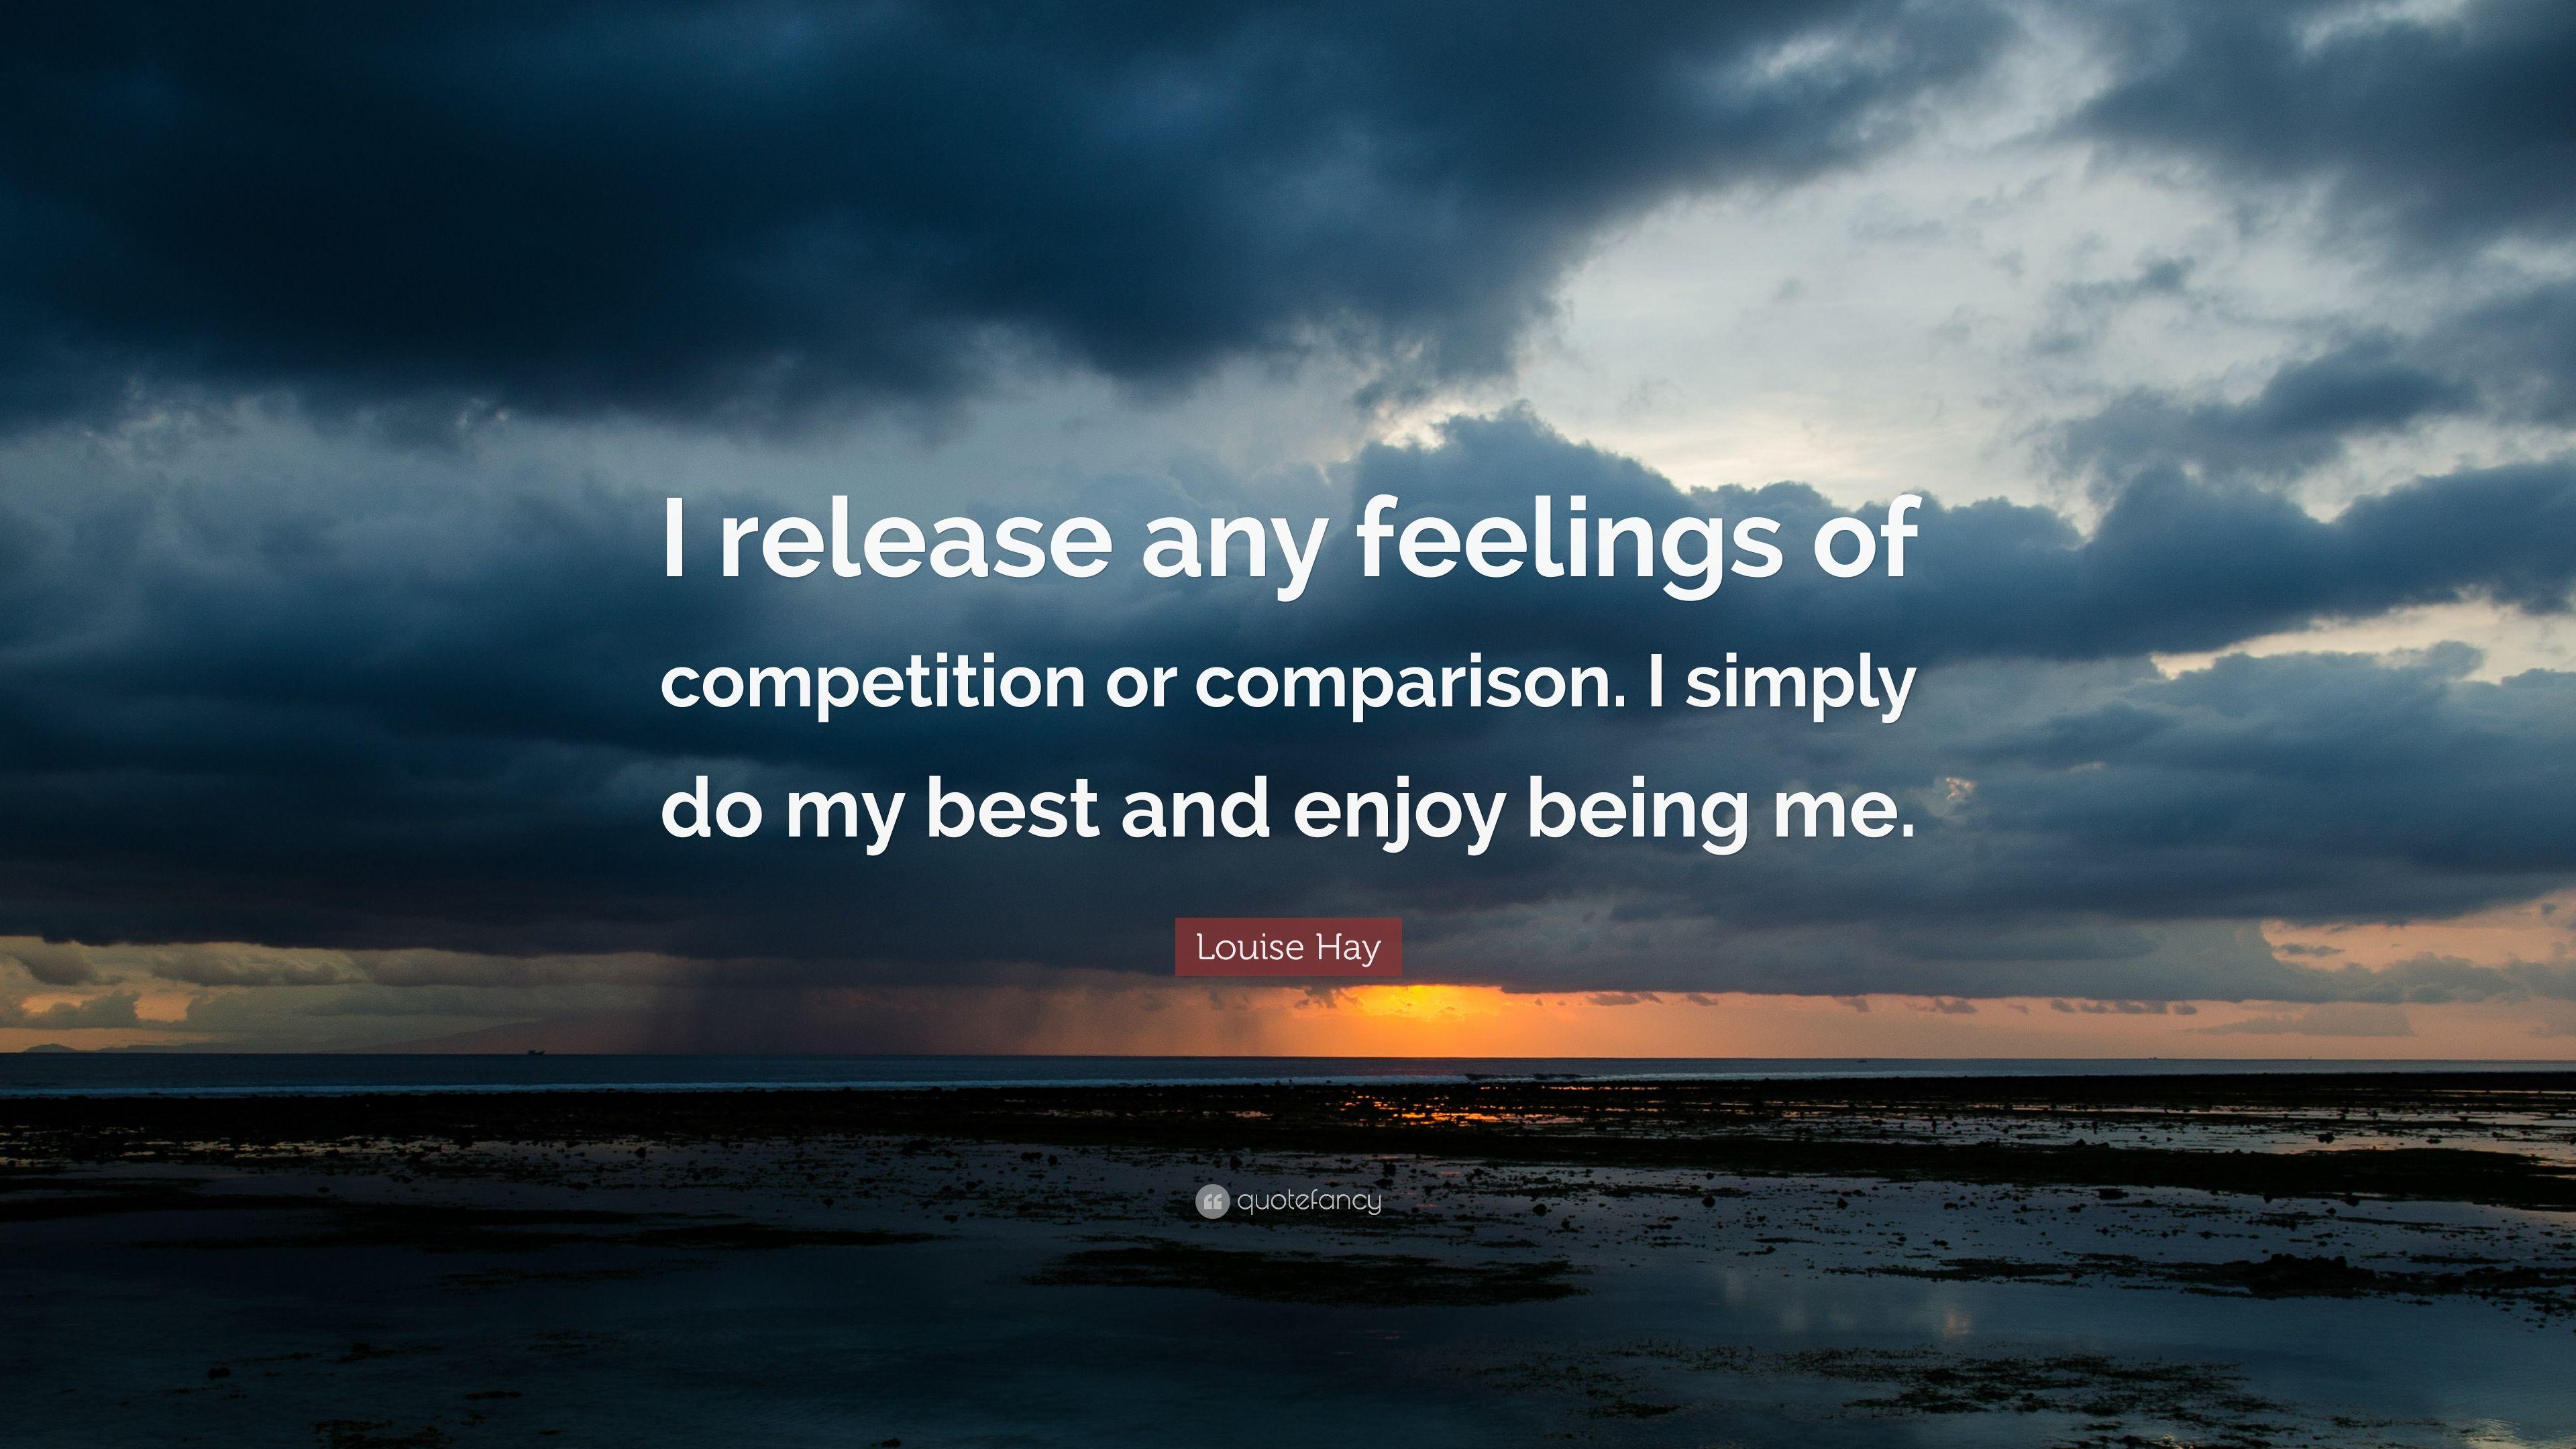 Louise Hay Quote: “I release any feelings of competition or